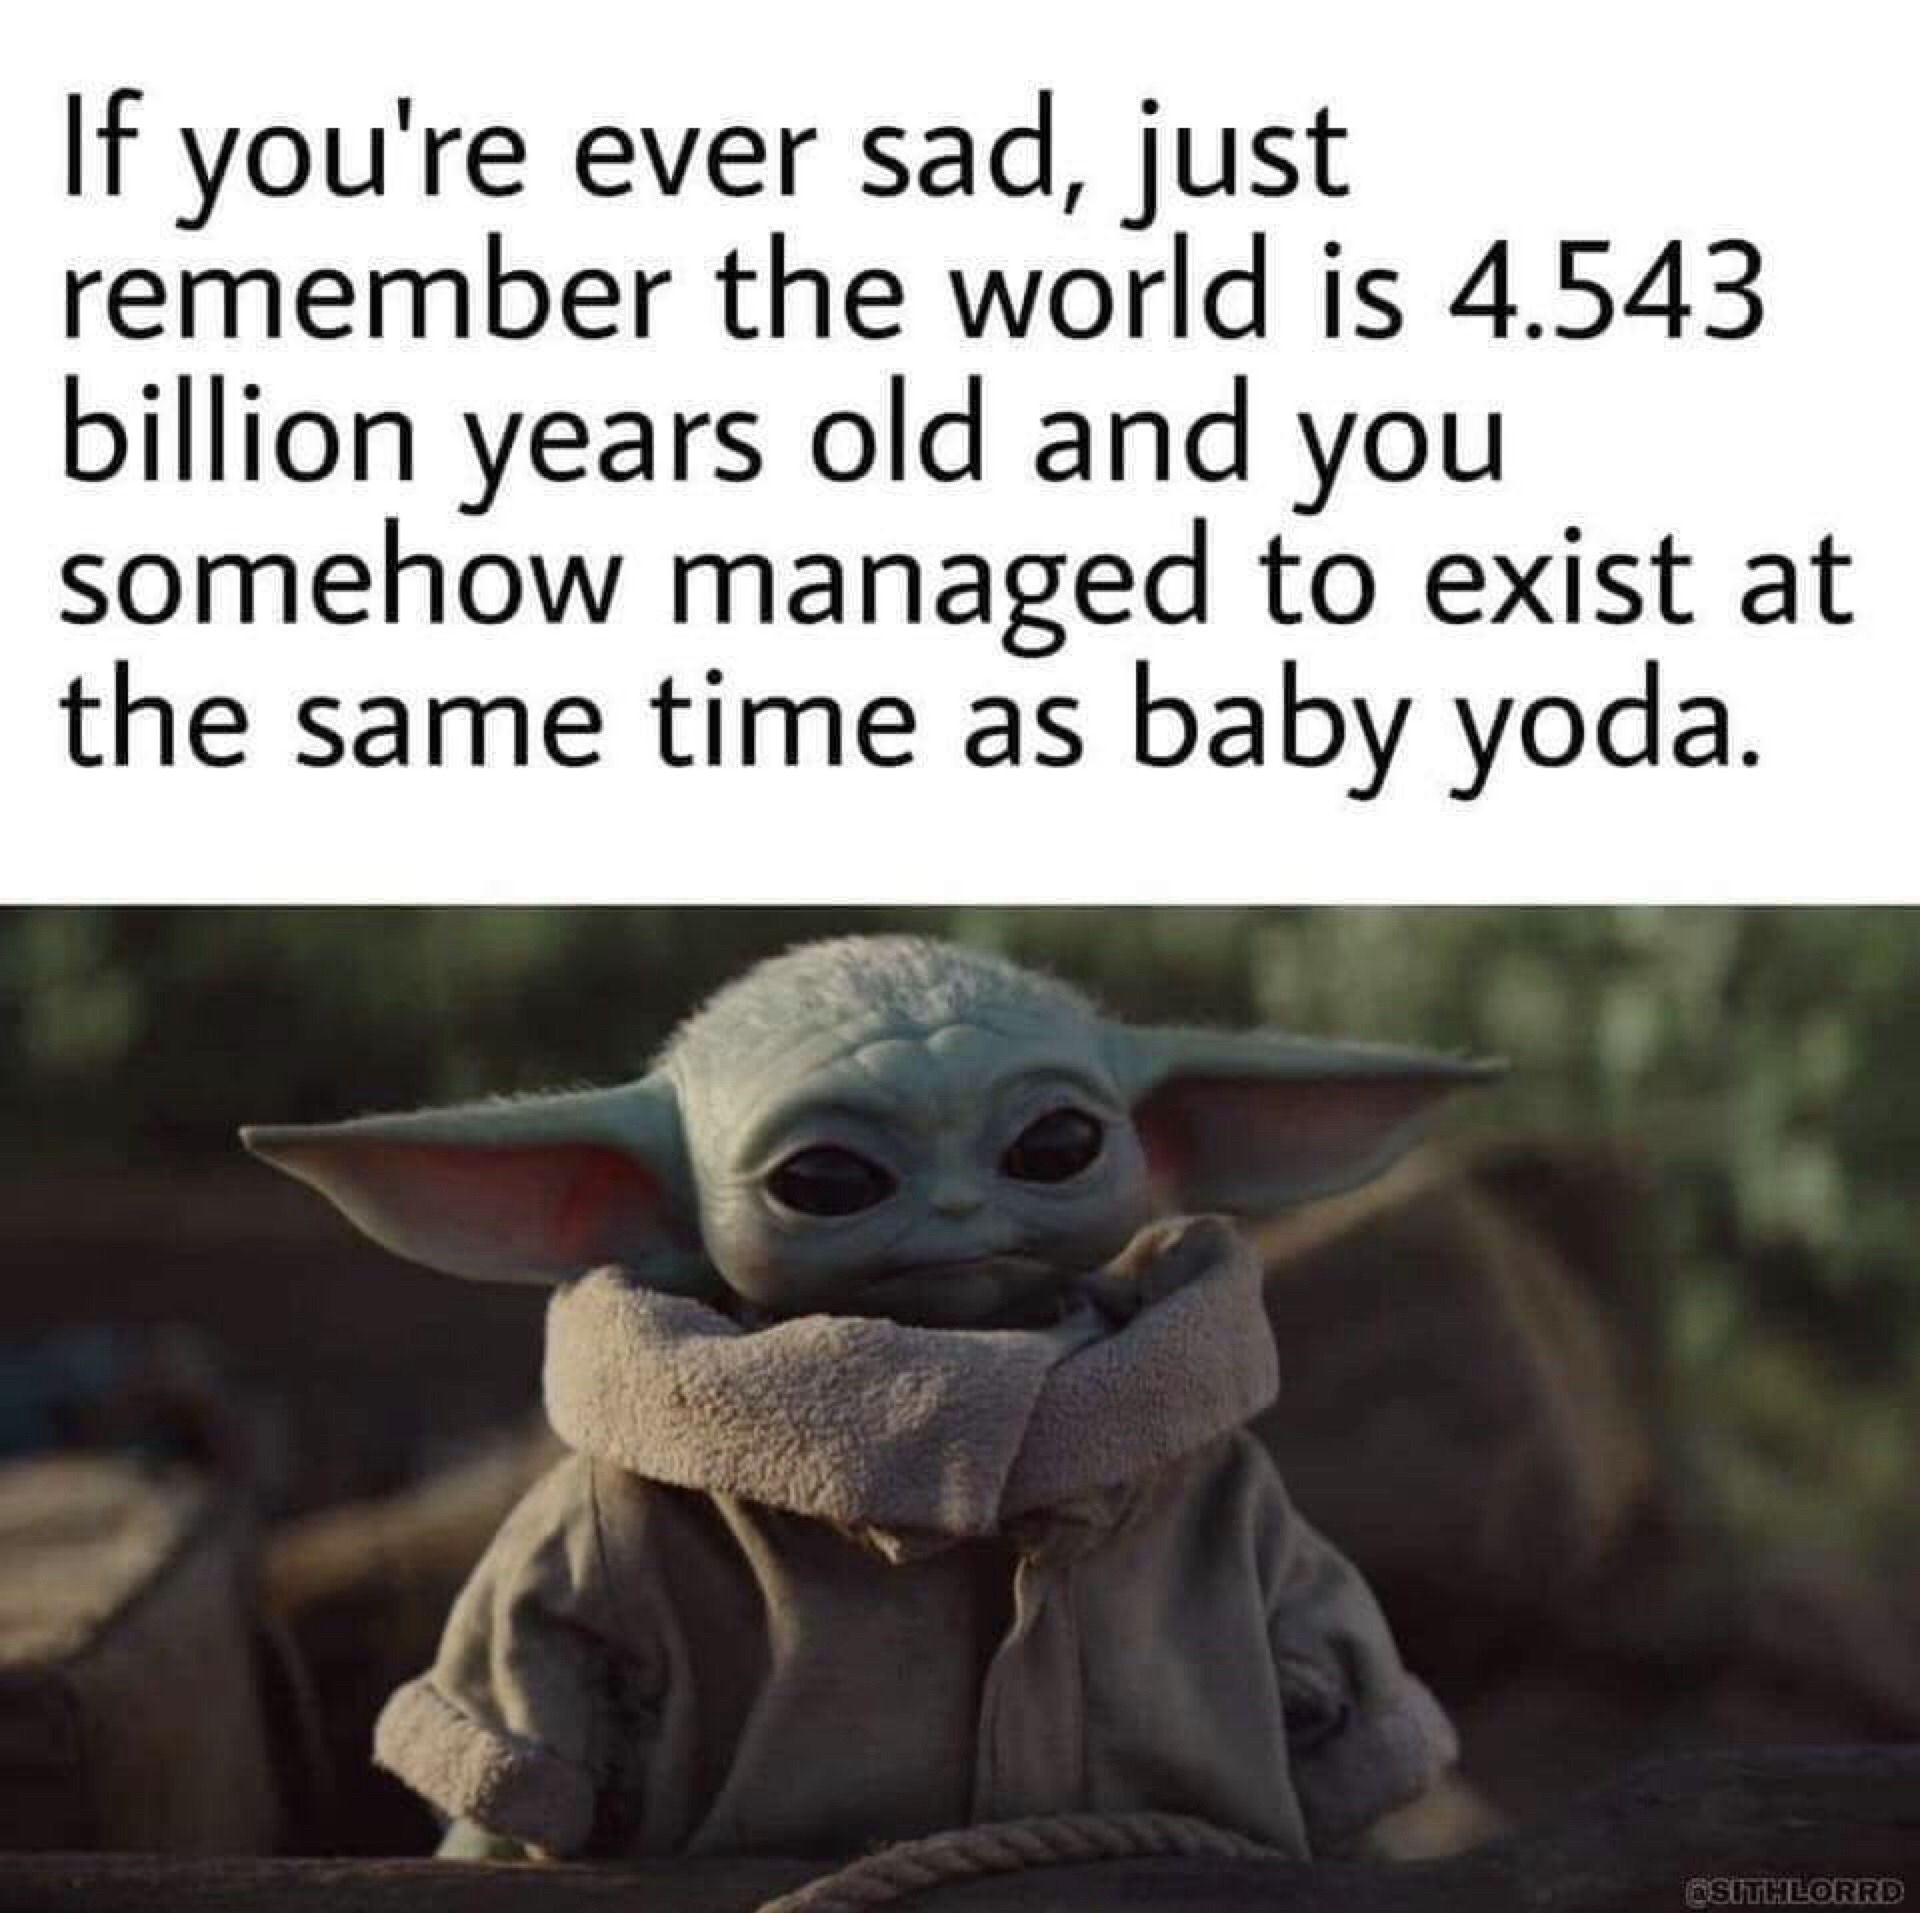 baby yoda meme - If you're ever sad, just remember the world is 4.543 billion years old and you somehow managed to exist at the same time as baby yoda. sthLORRD